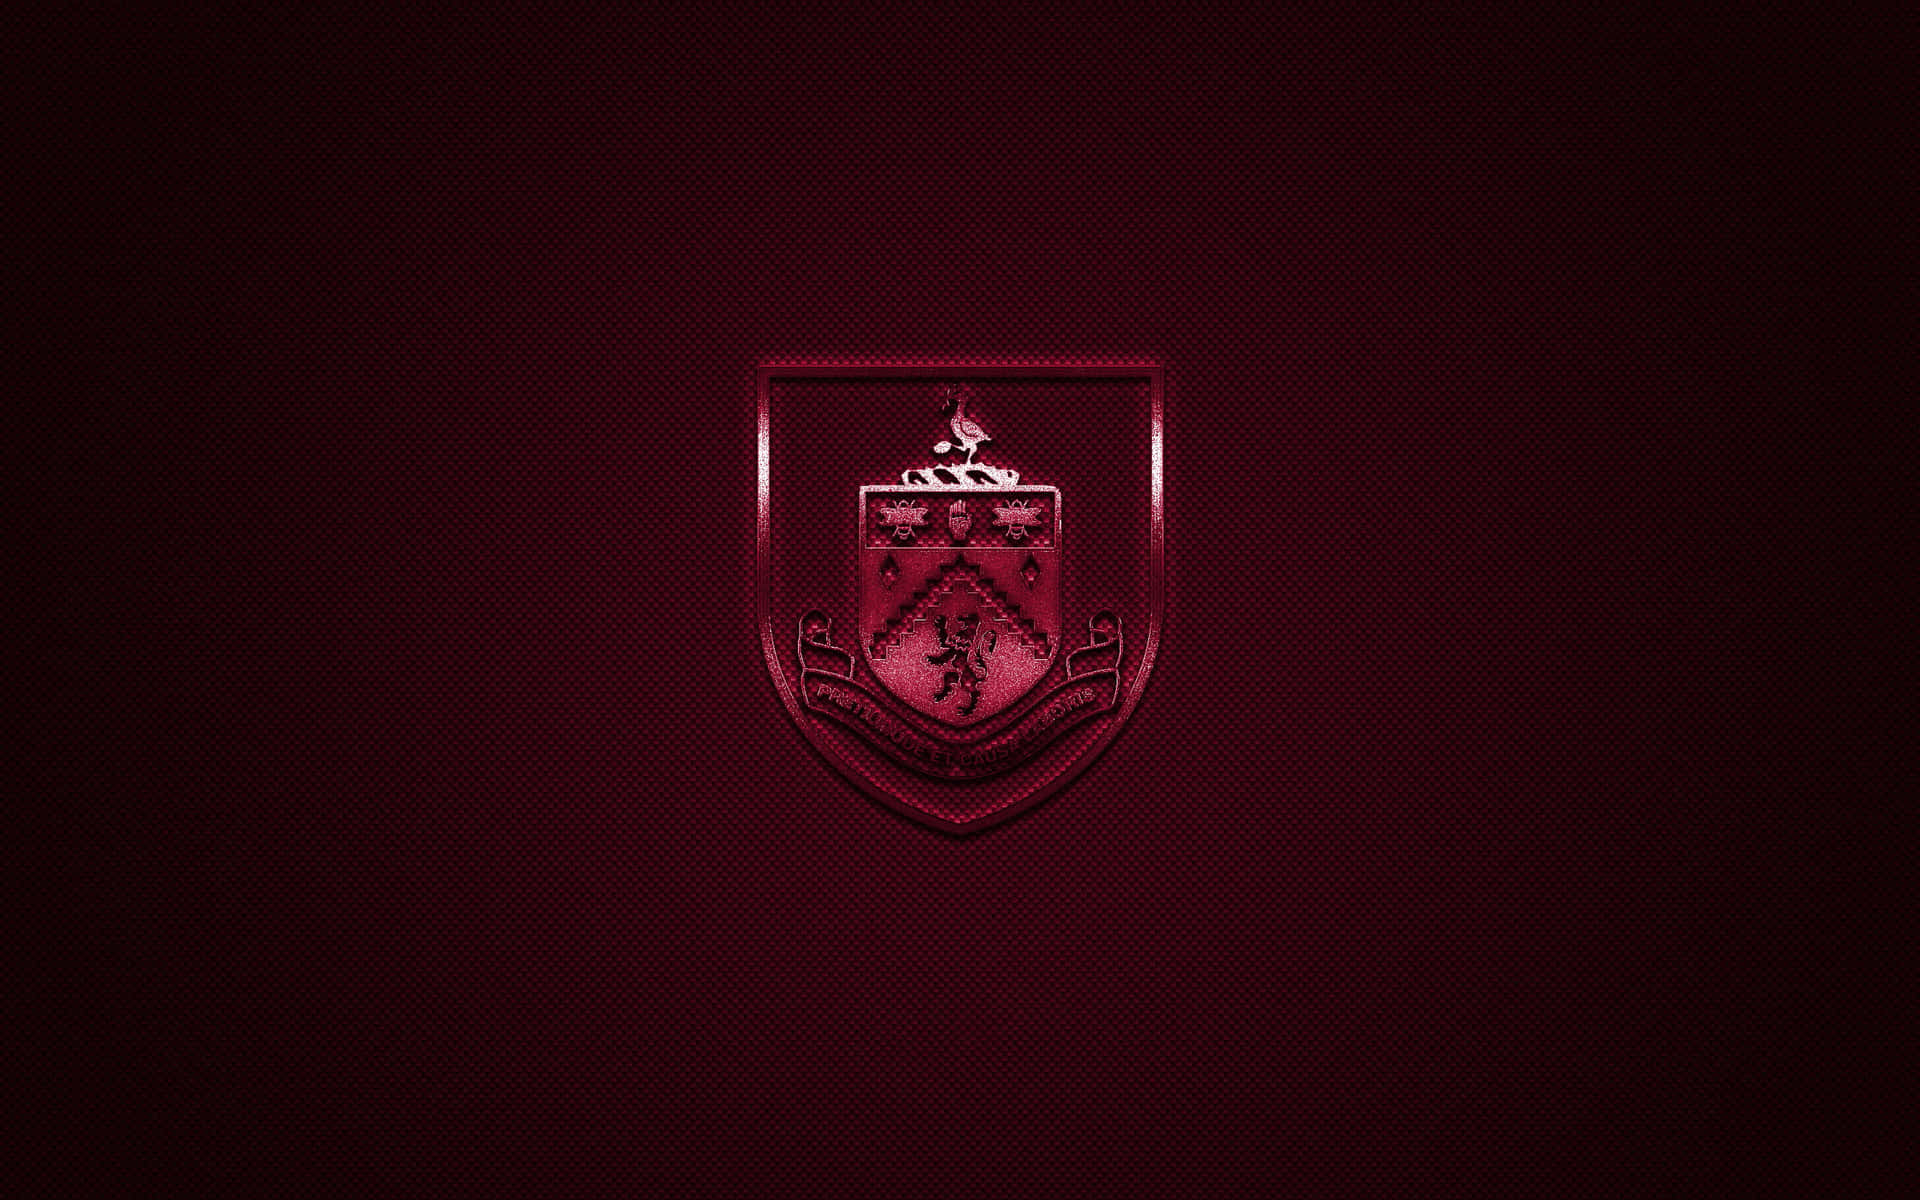 Burnley FC Players Celebrating on the Field Wallpaper